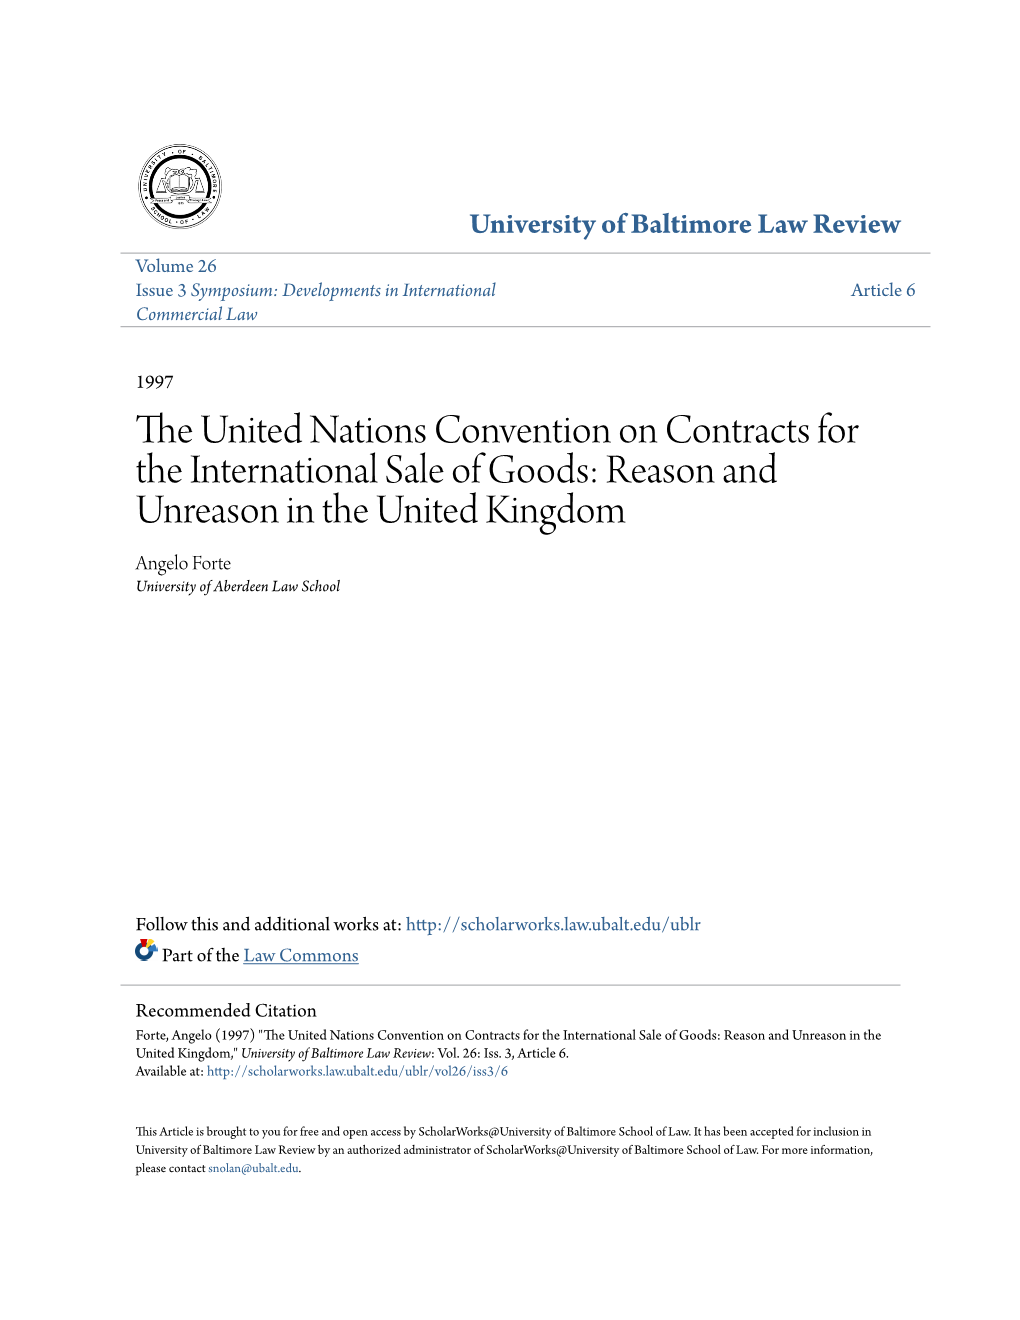 The United Nations Convention on Contracts for the International Sale of Goods: Reason and Unreason in the United Kingdom